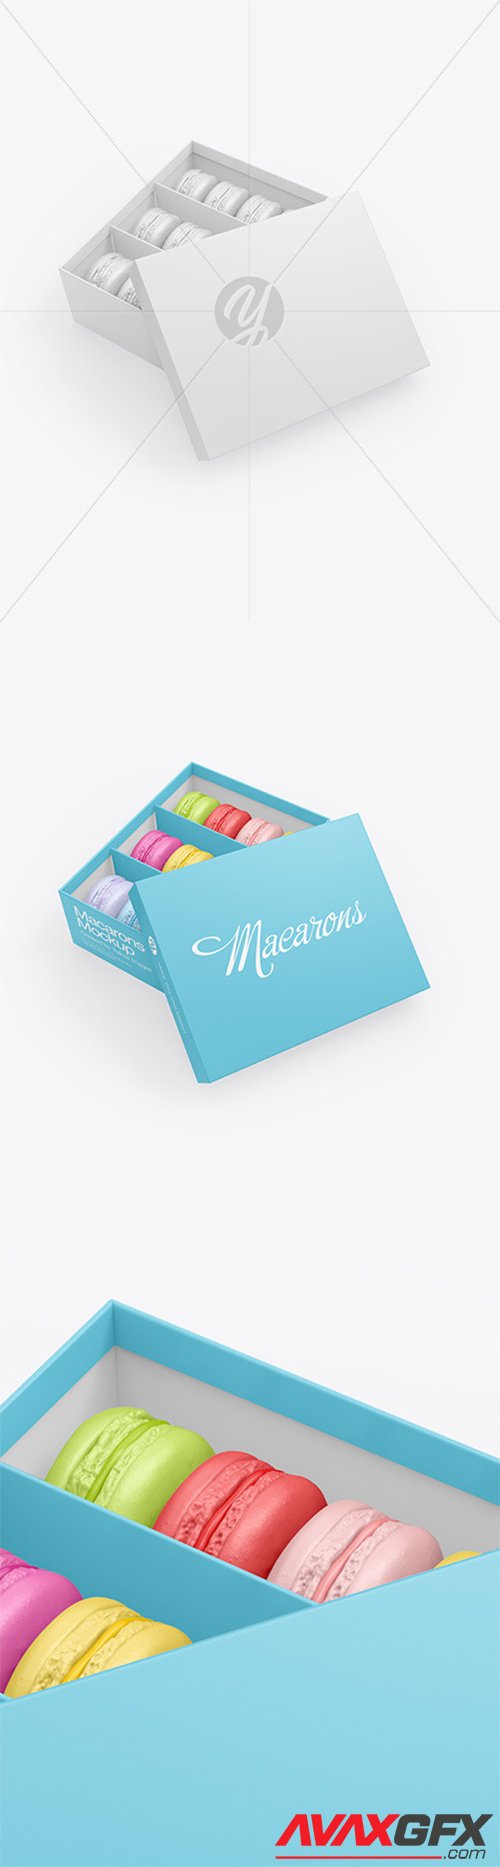 Opened Paper Box With Macarons Mockup 65626